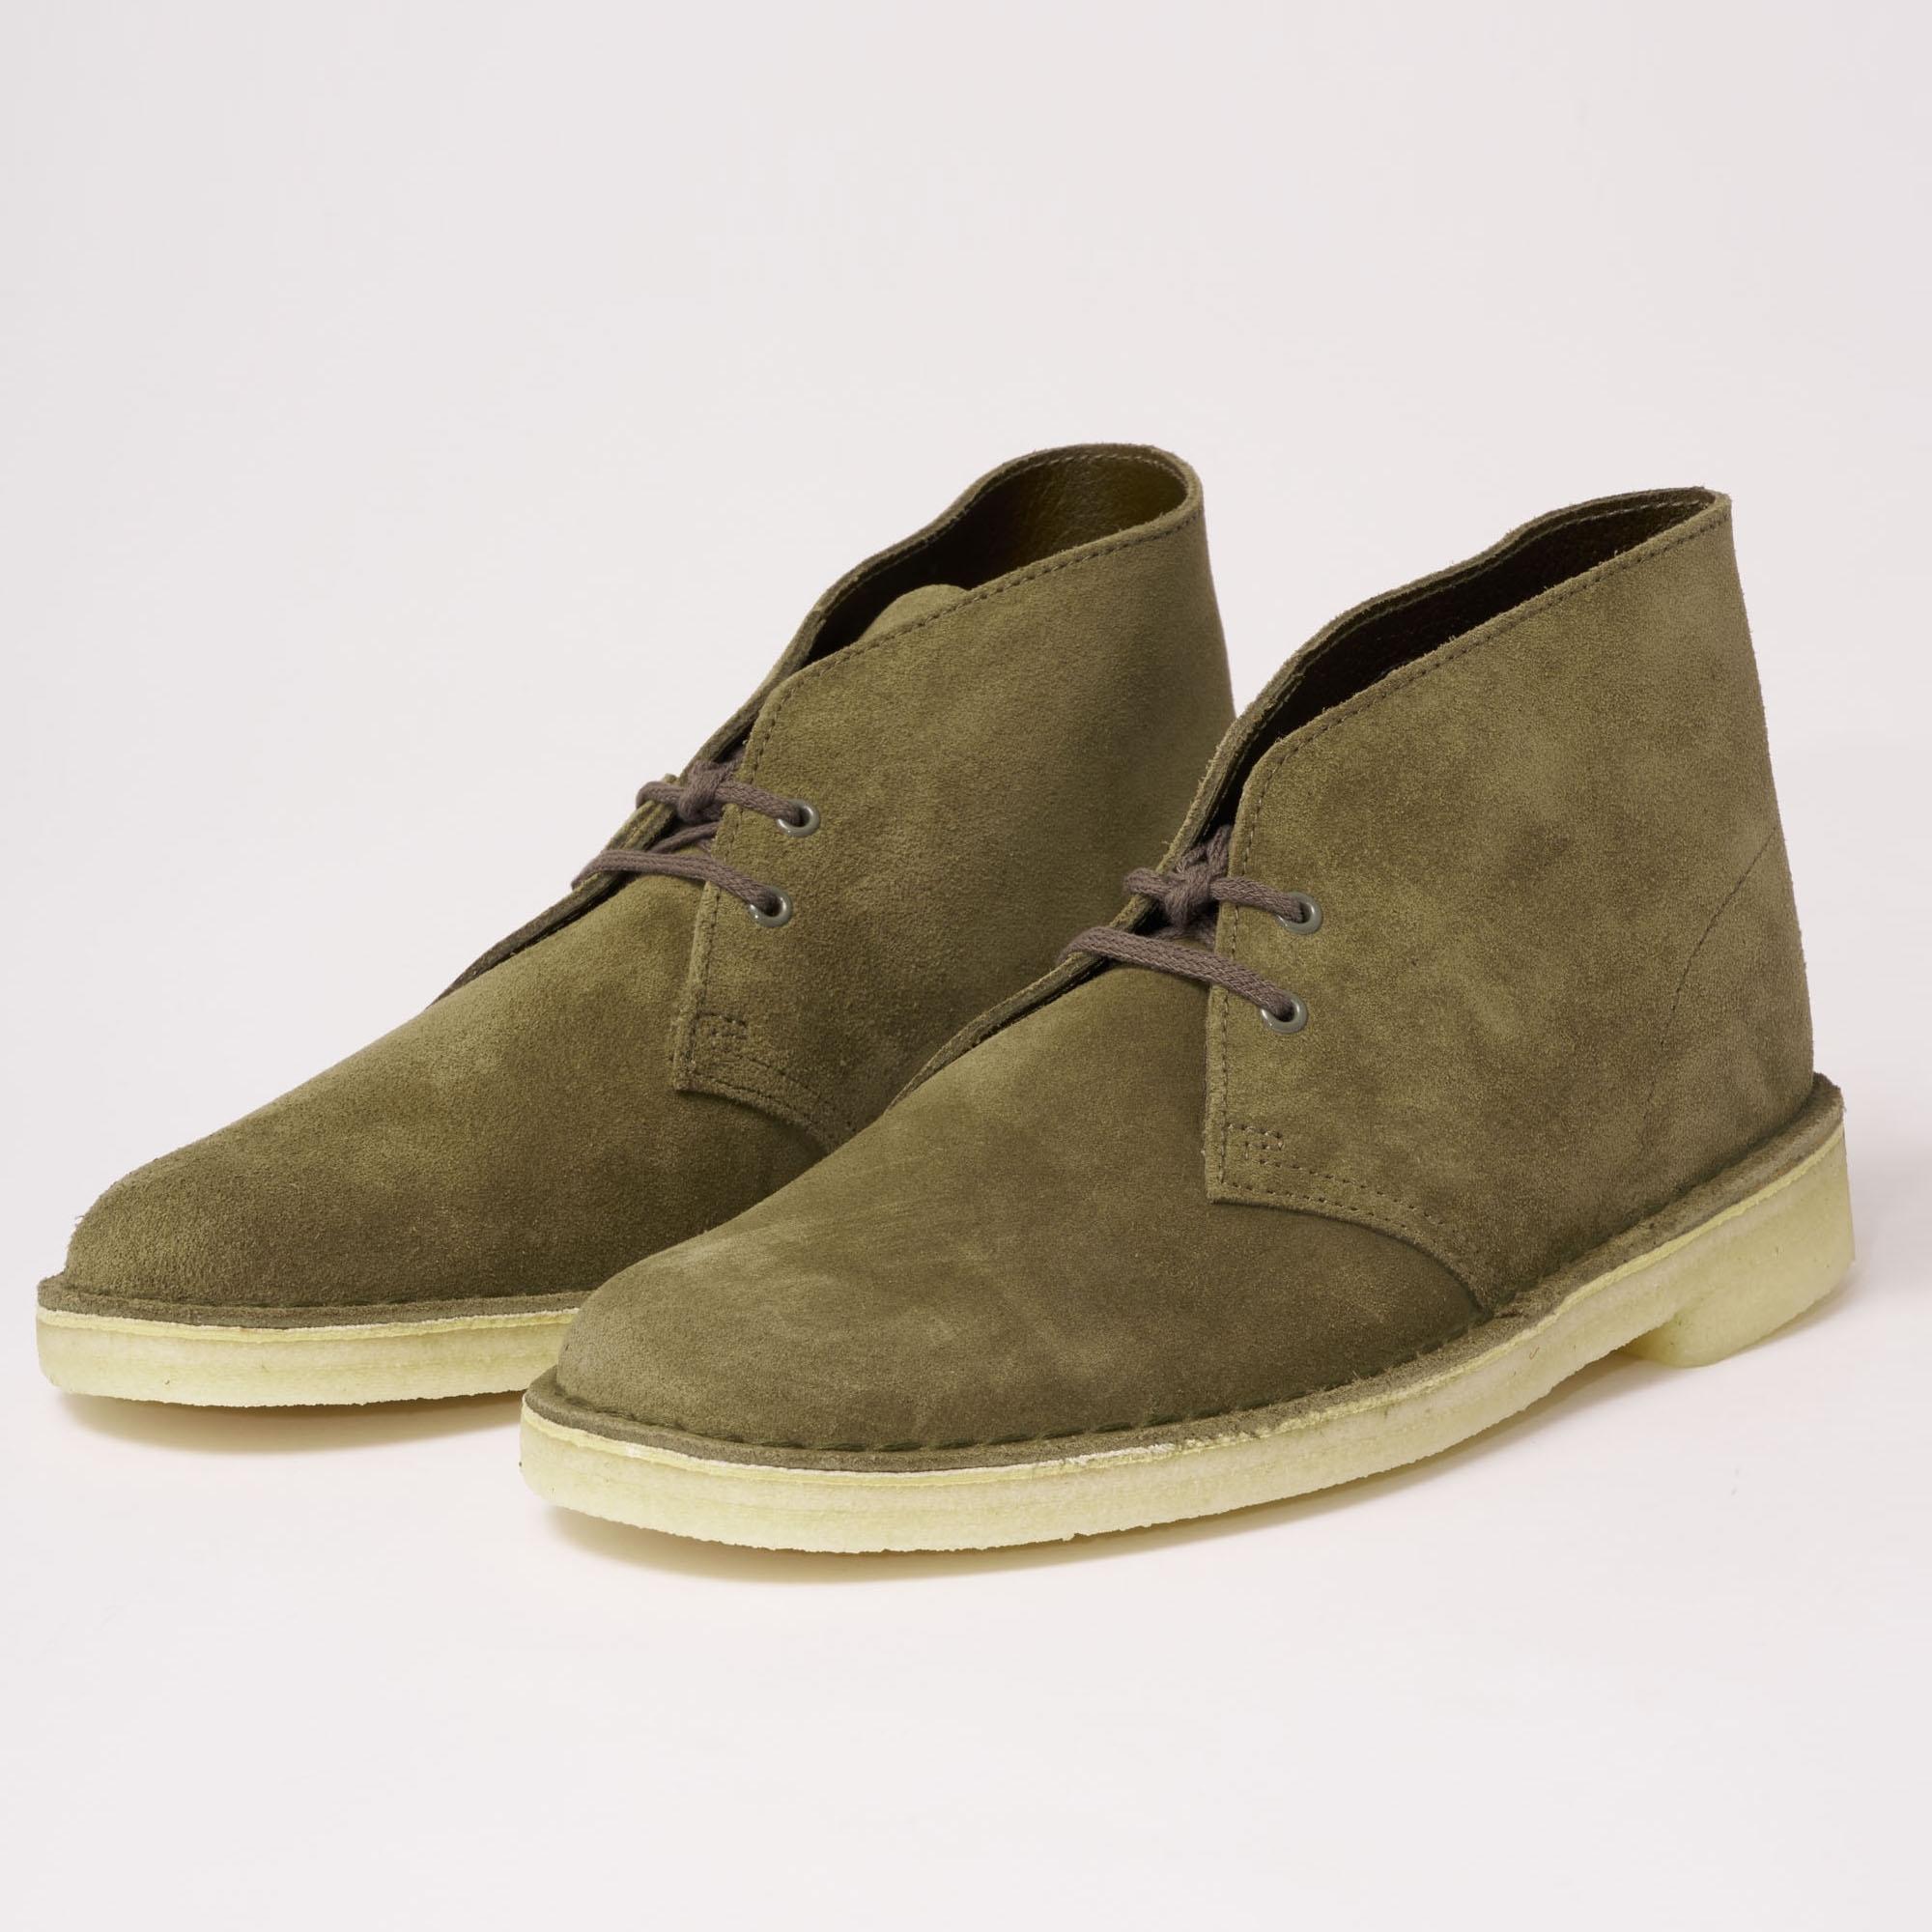 Suede Desert Boots in Olive (Green 